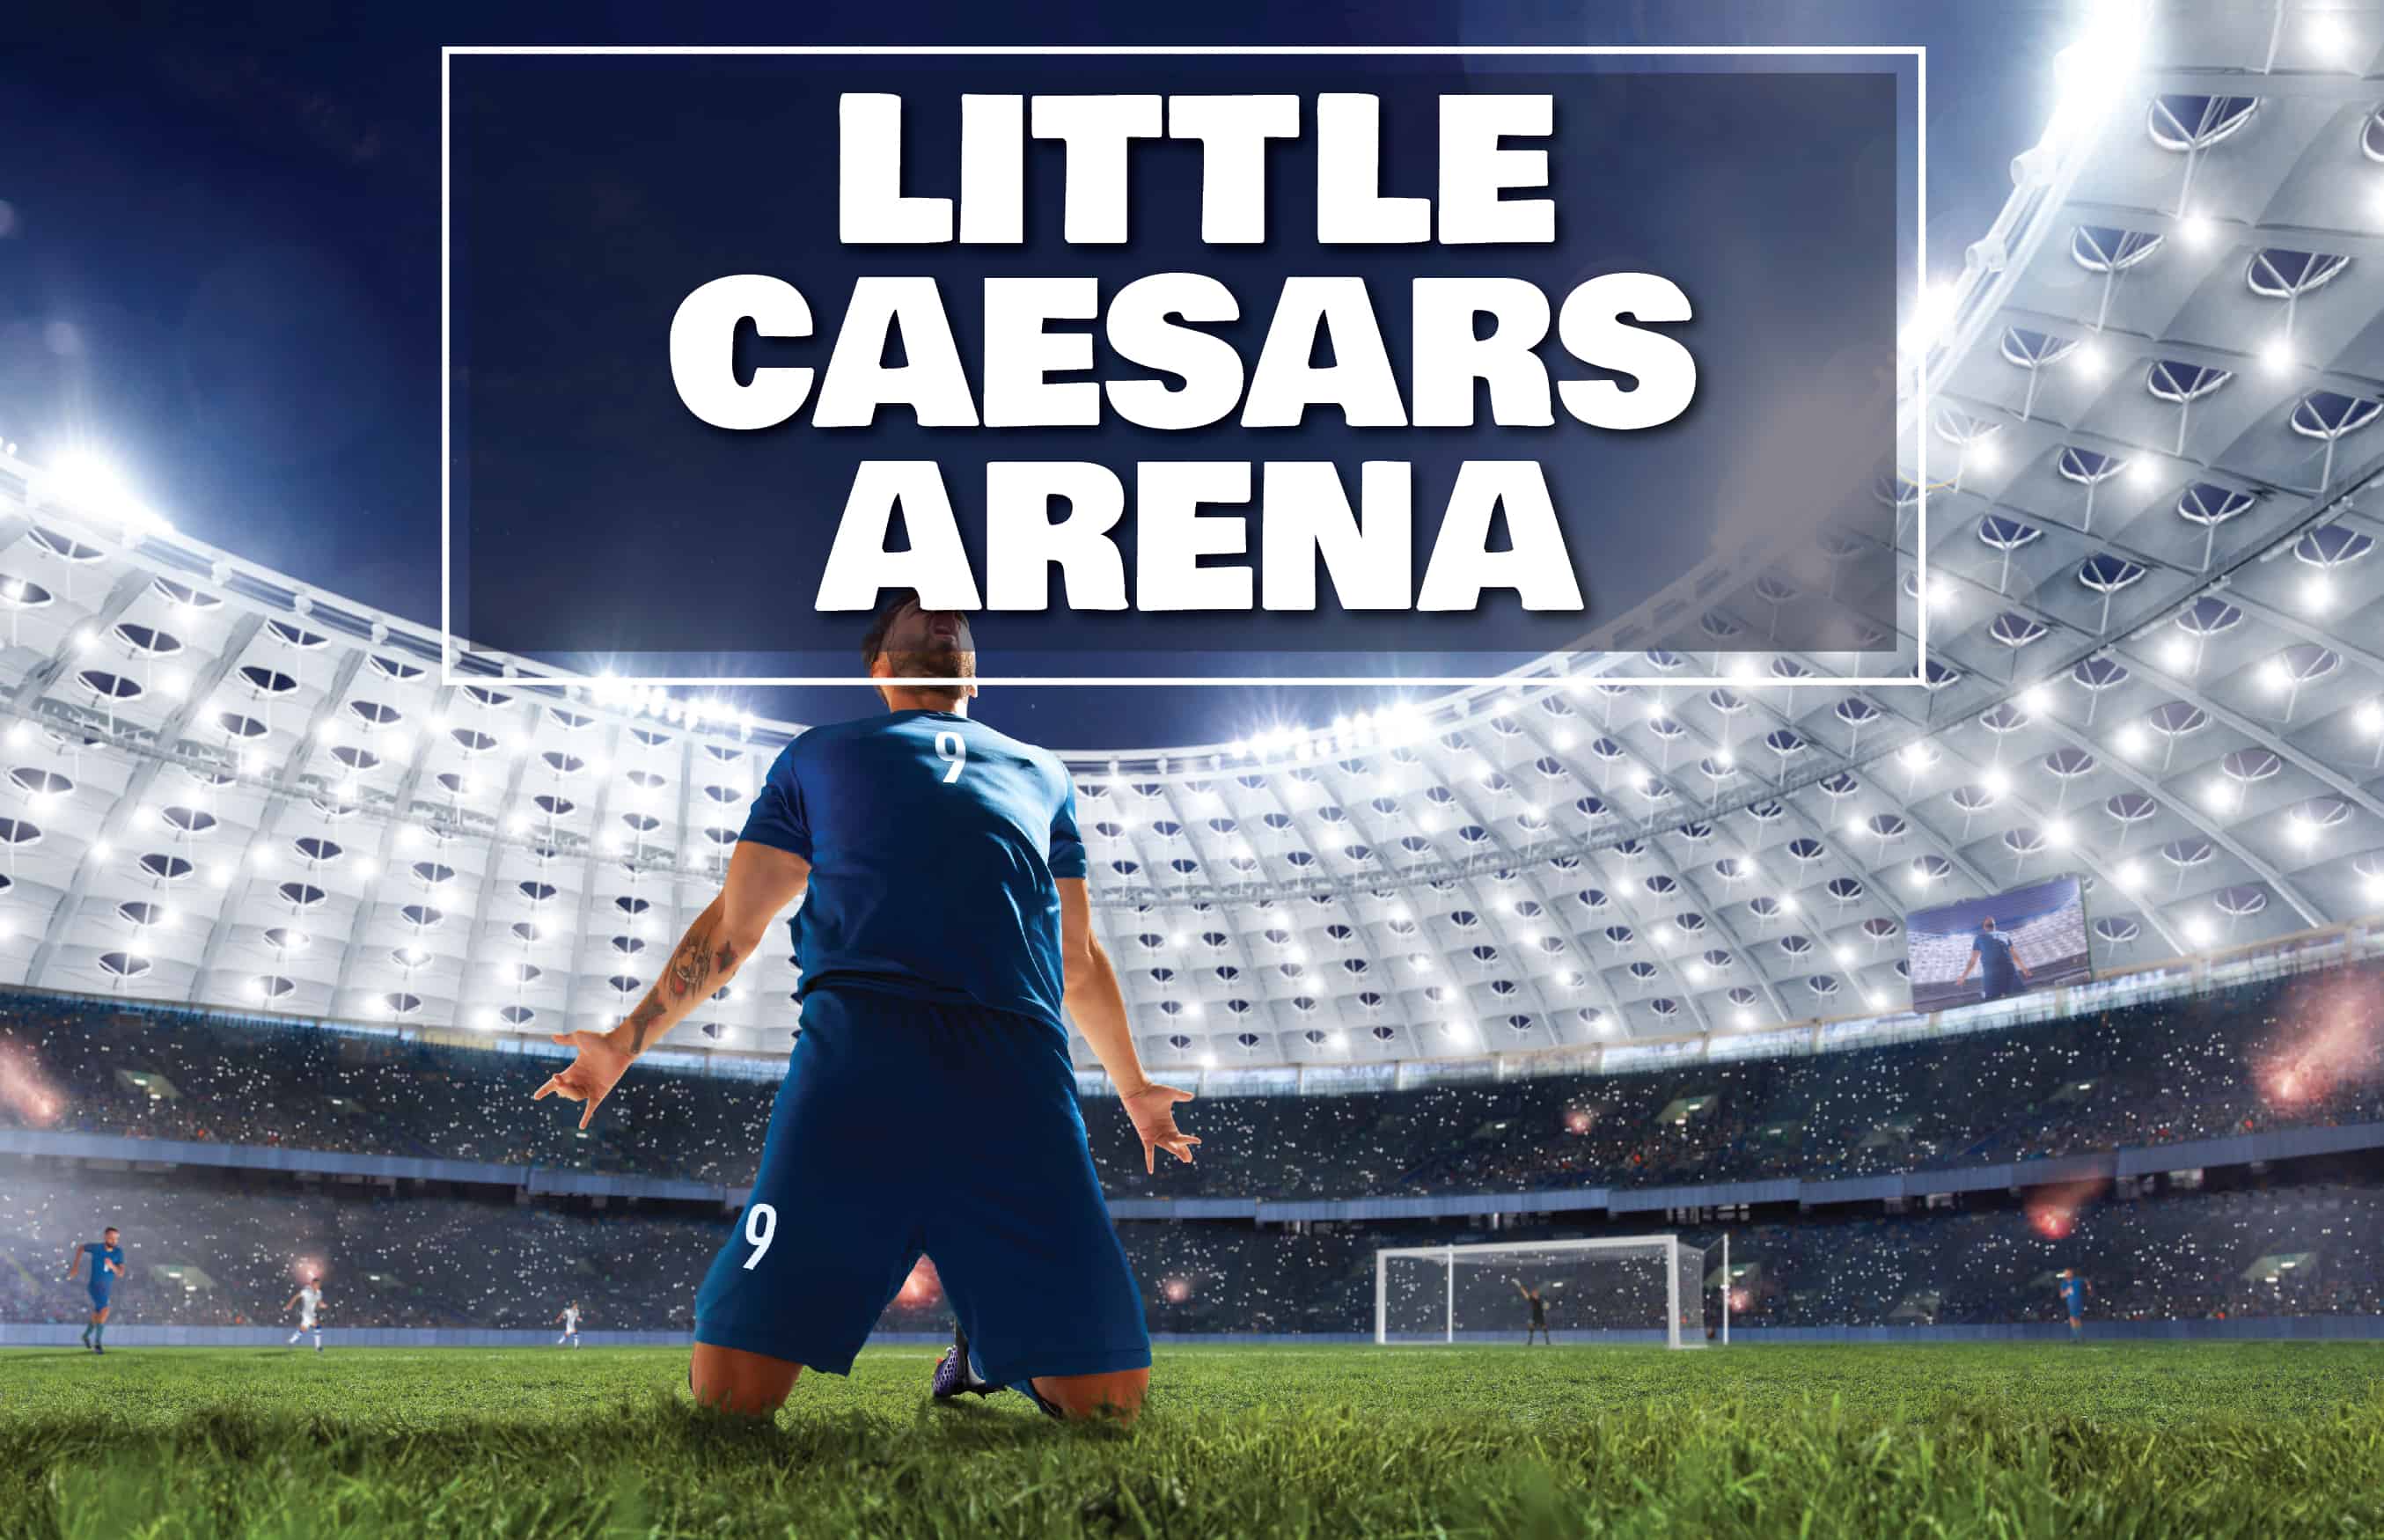  Kicking Off the Party at Little Caesars Arena - Tickets And Venue Details Of Little...